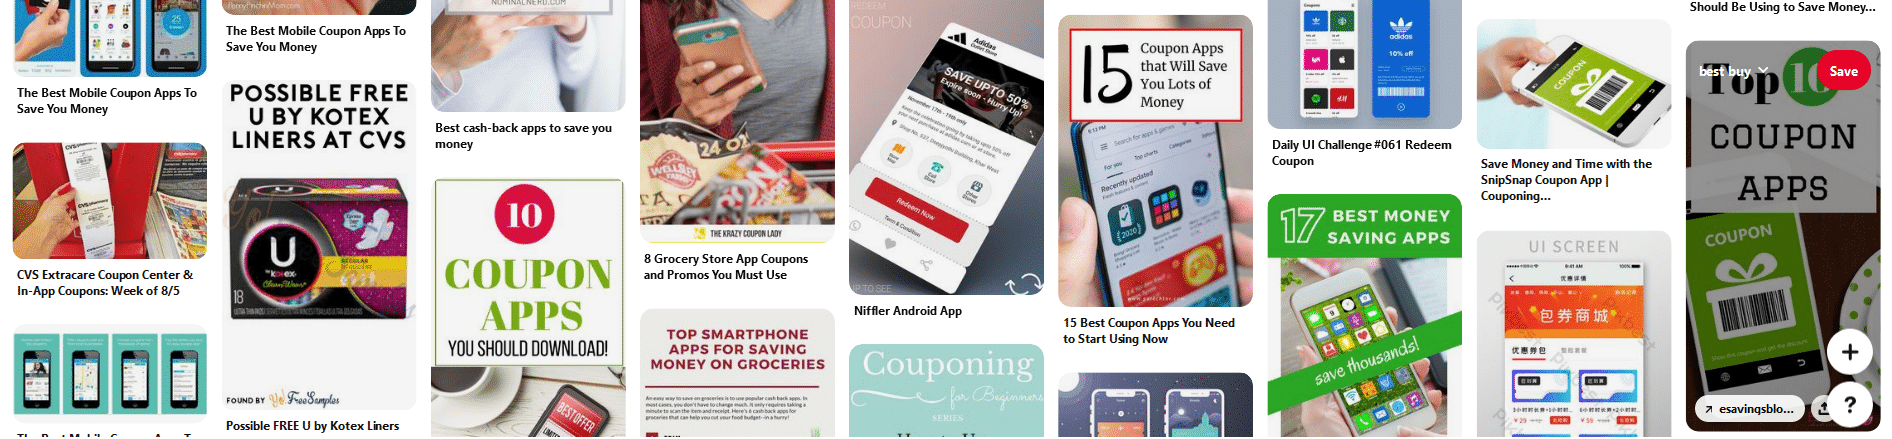 Free internet apps allowing for coupons